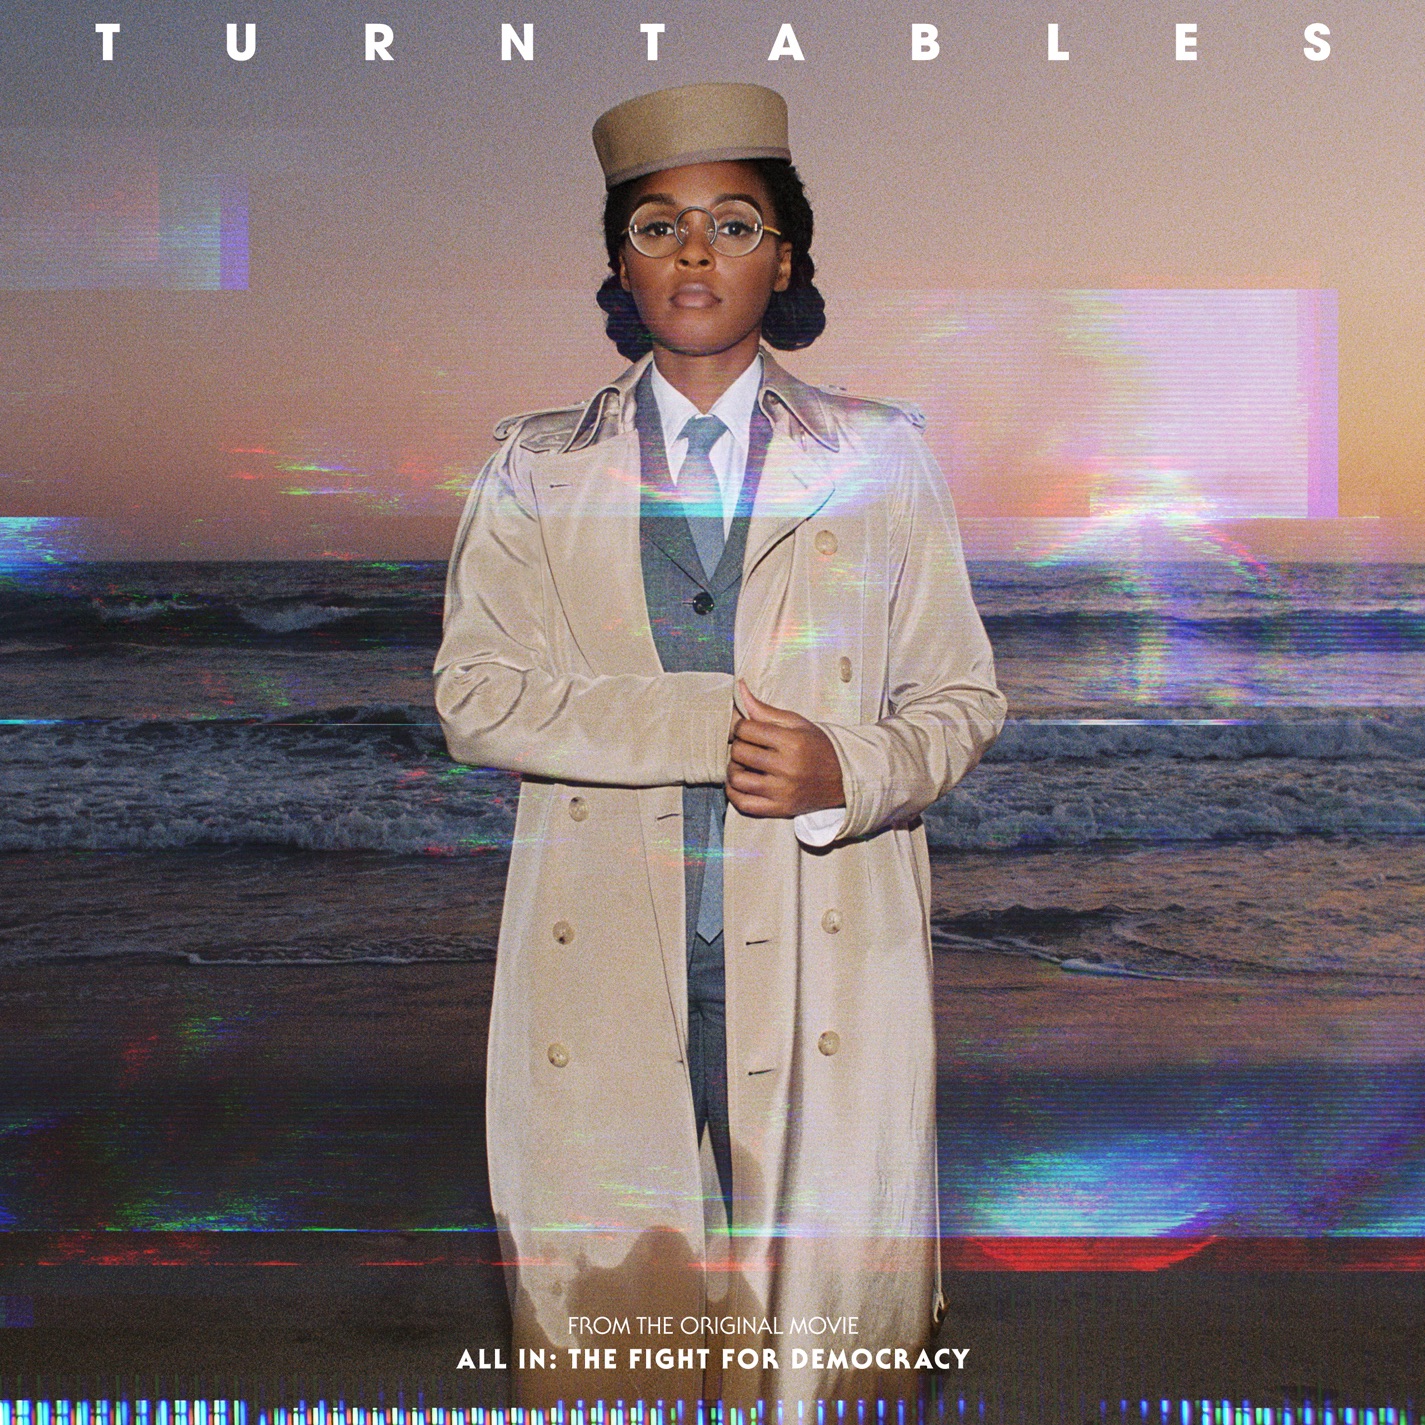 Janelle Monáe - Turntables (from the Amazon Original Movie "All In: The Fight for Democracy") - Single